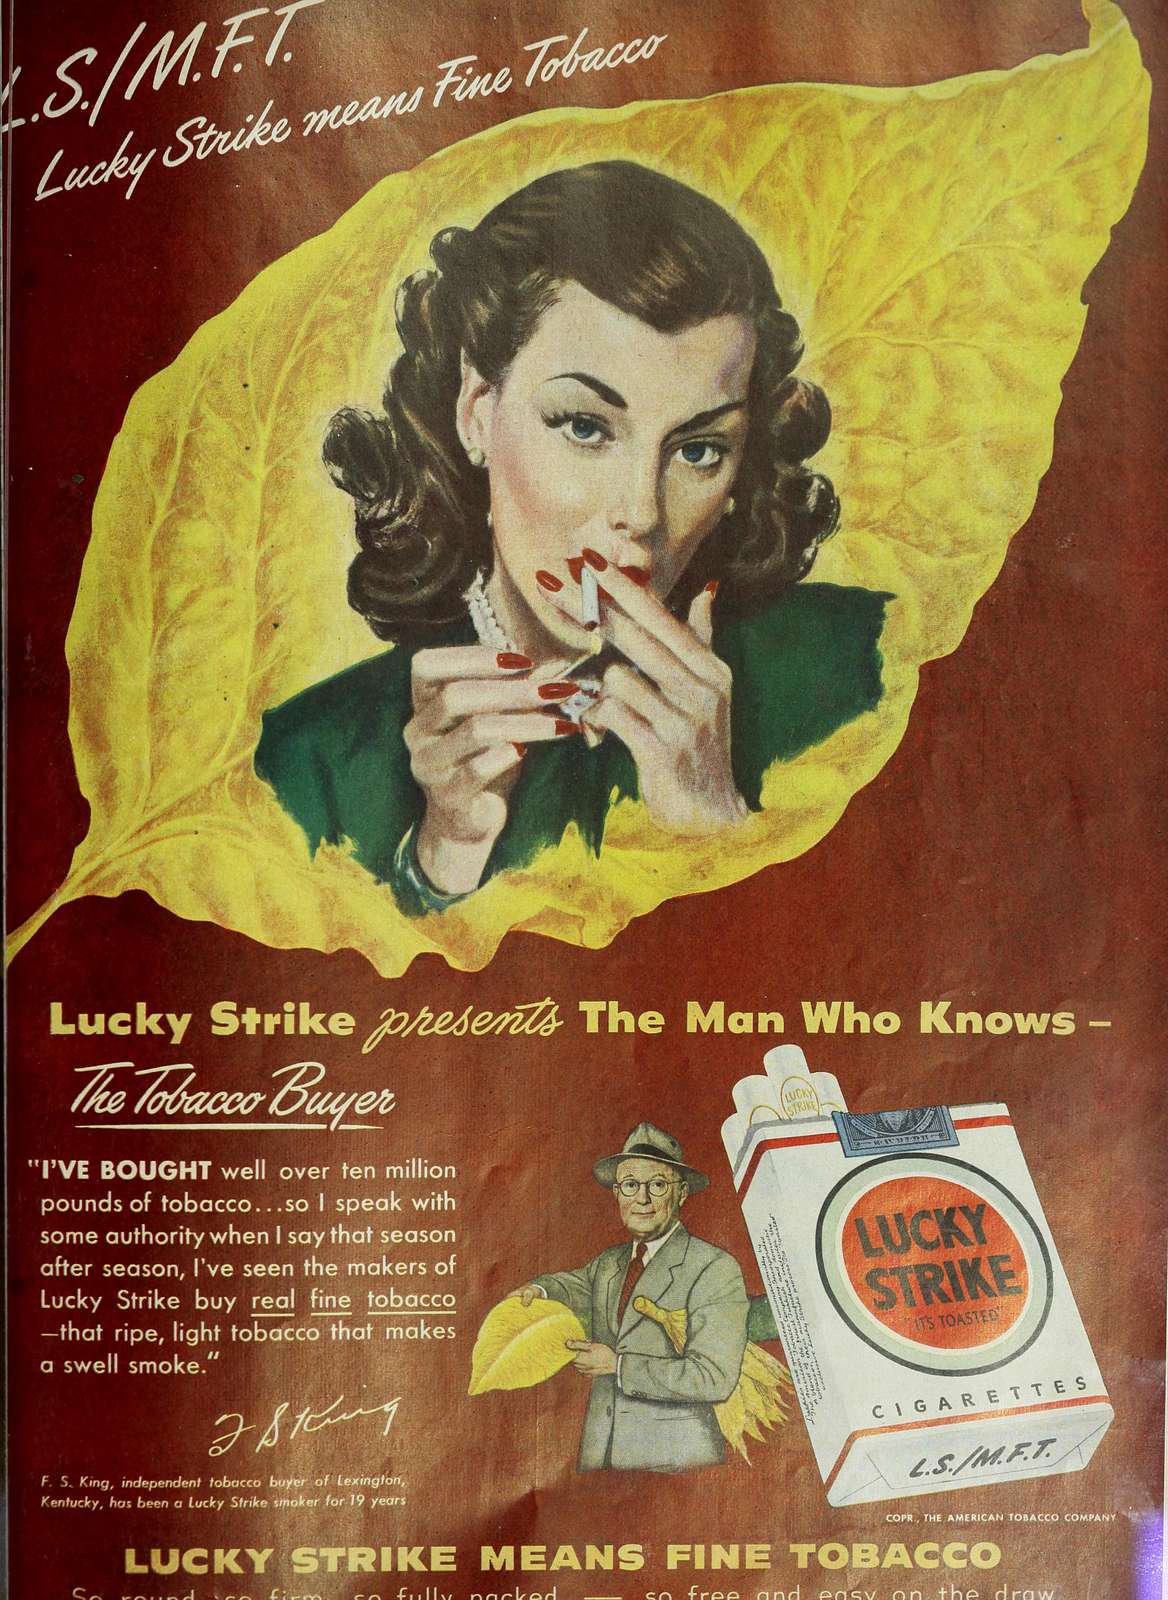 A friend of mine had an original Lucky Strike package - even says